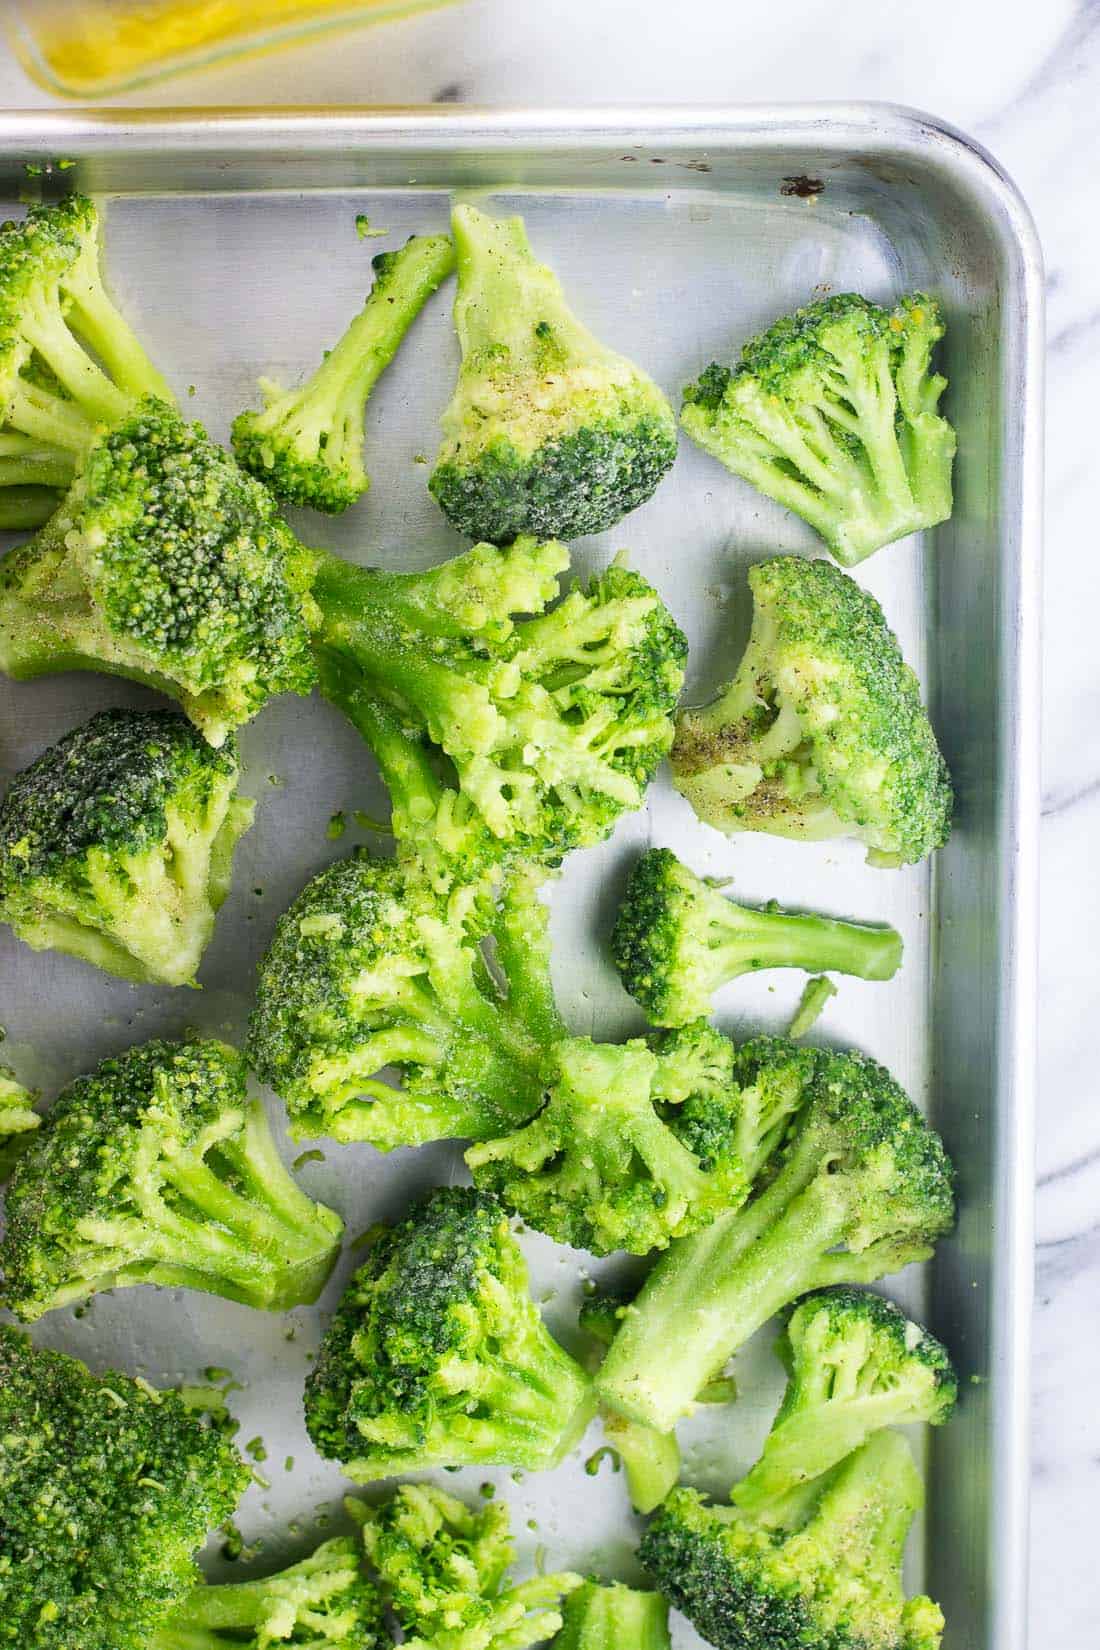 Broccoli florets tossed with olive oil and spices on a sheet pan ready for the oven.